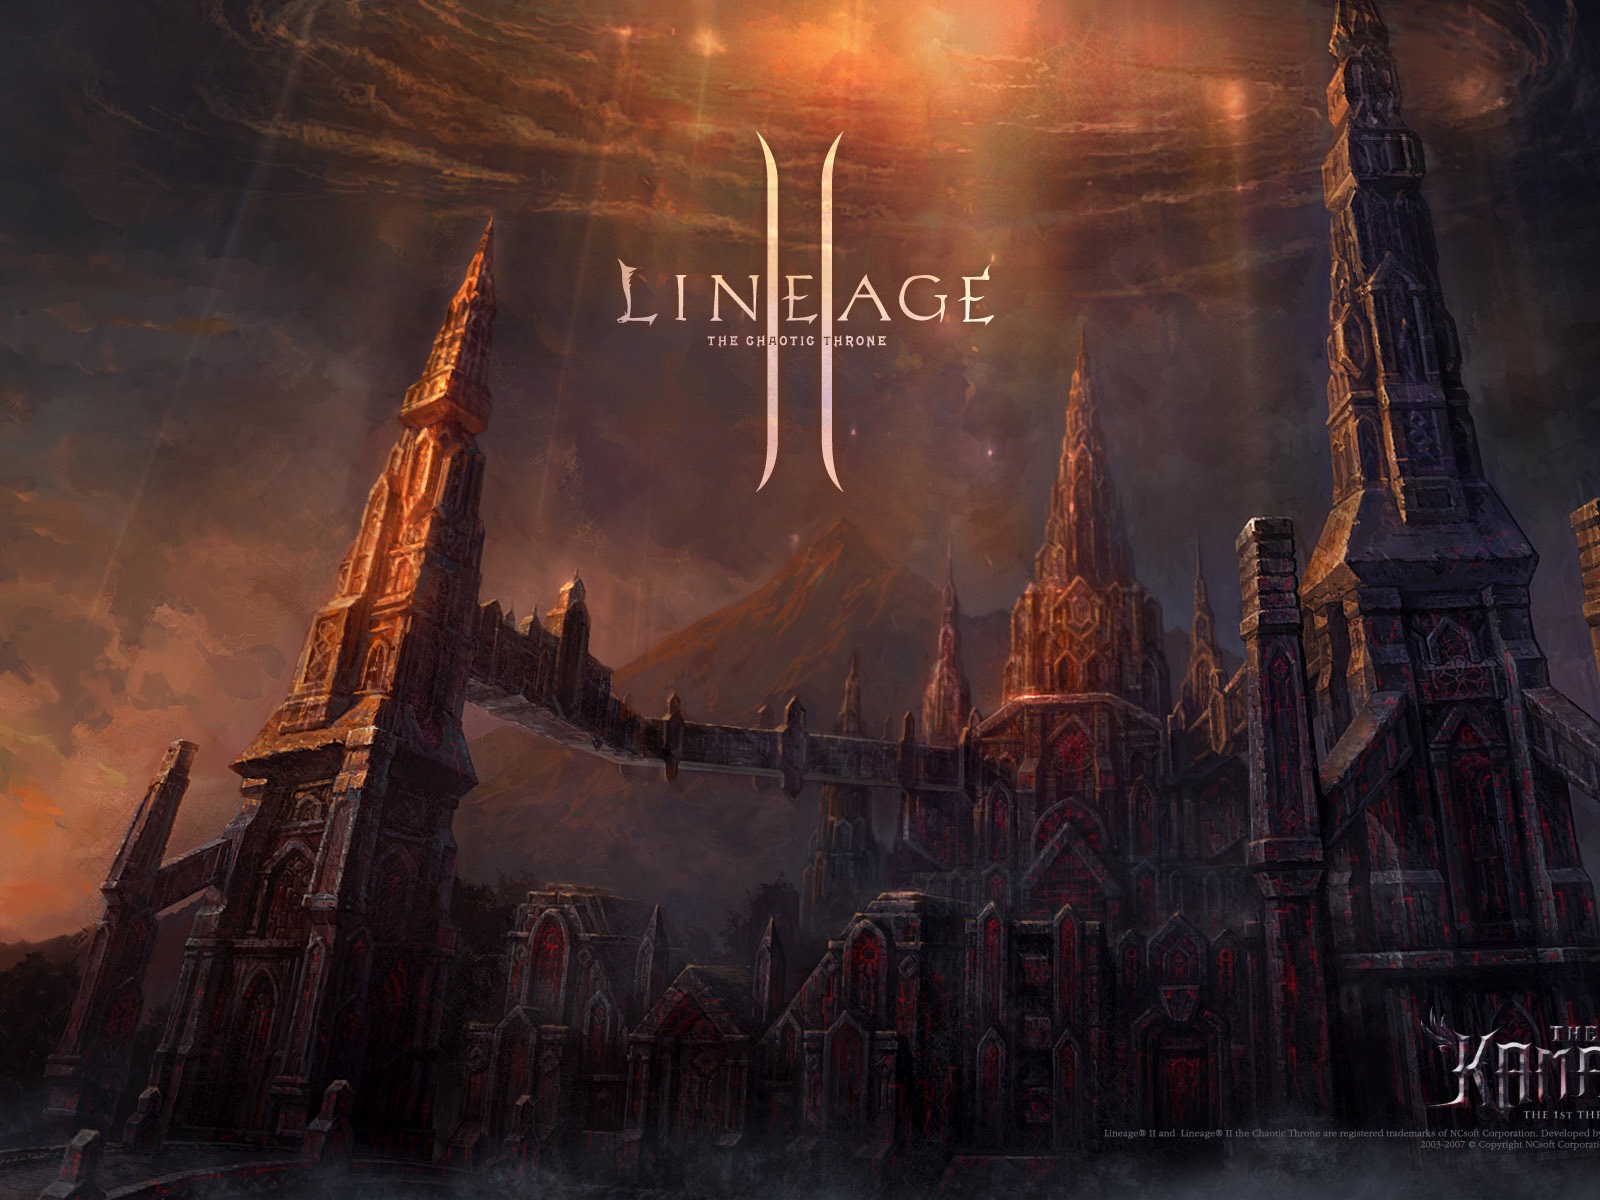 LINEAGE Ⅱ modeling HD gaming wallpapers #4 - 1600x1200